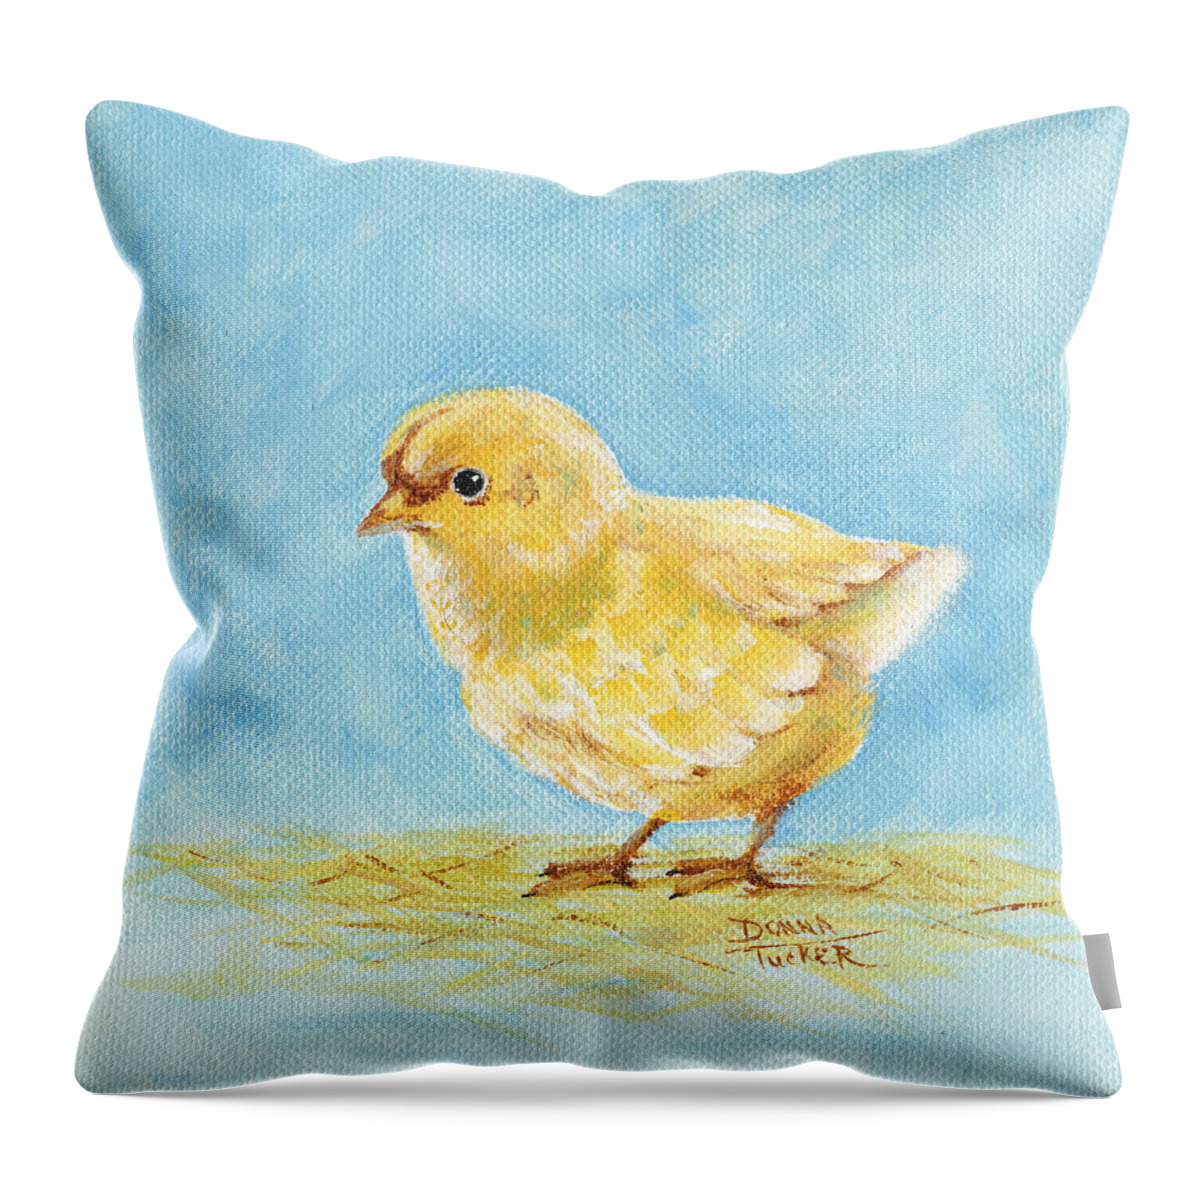 Chick Throw Pillow featuring the painting Chick by Donna Tucker